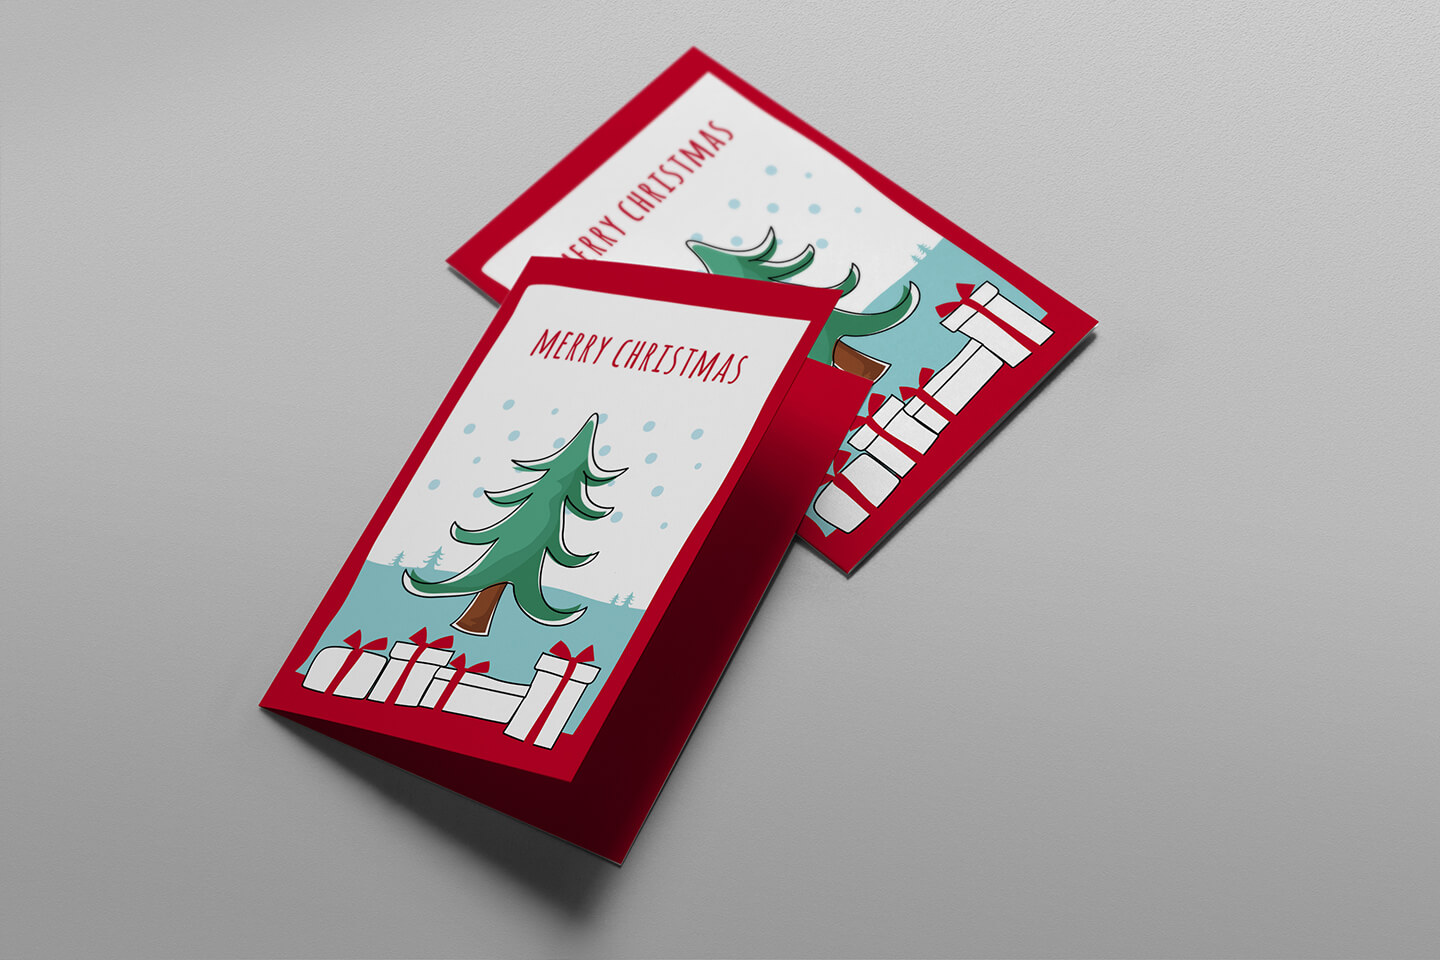 Free Christmas Card Templates For Photoshop & Illustrator Regarding Free Christmas Card Templates For Photoshop